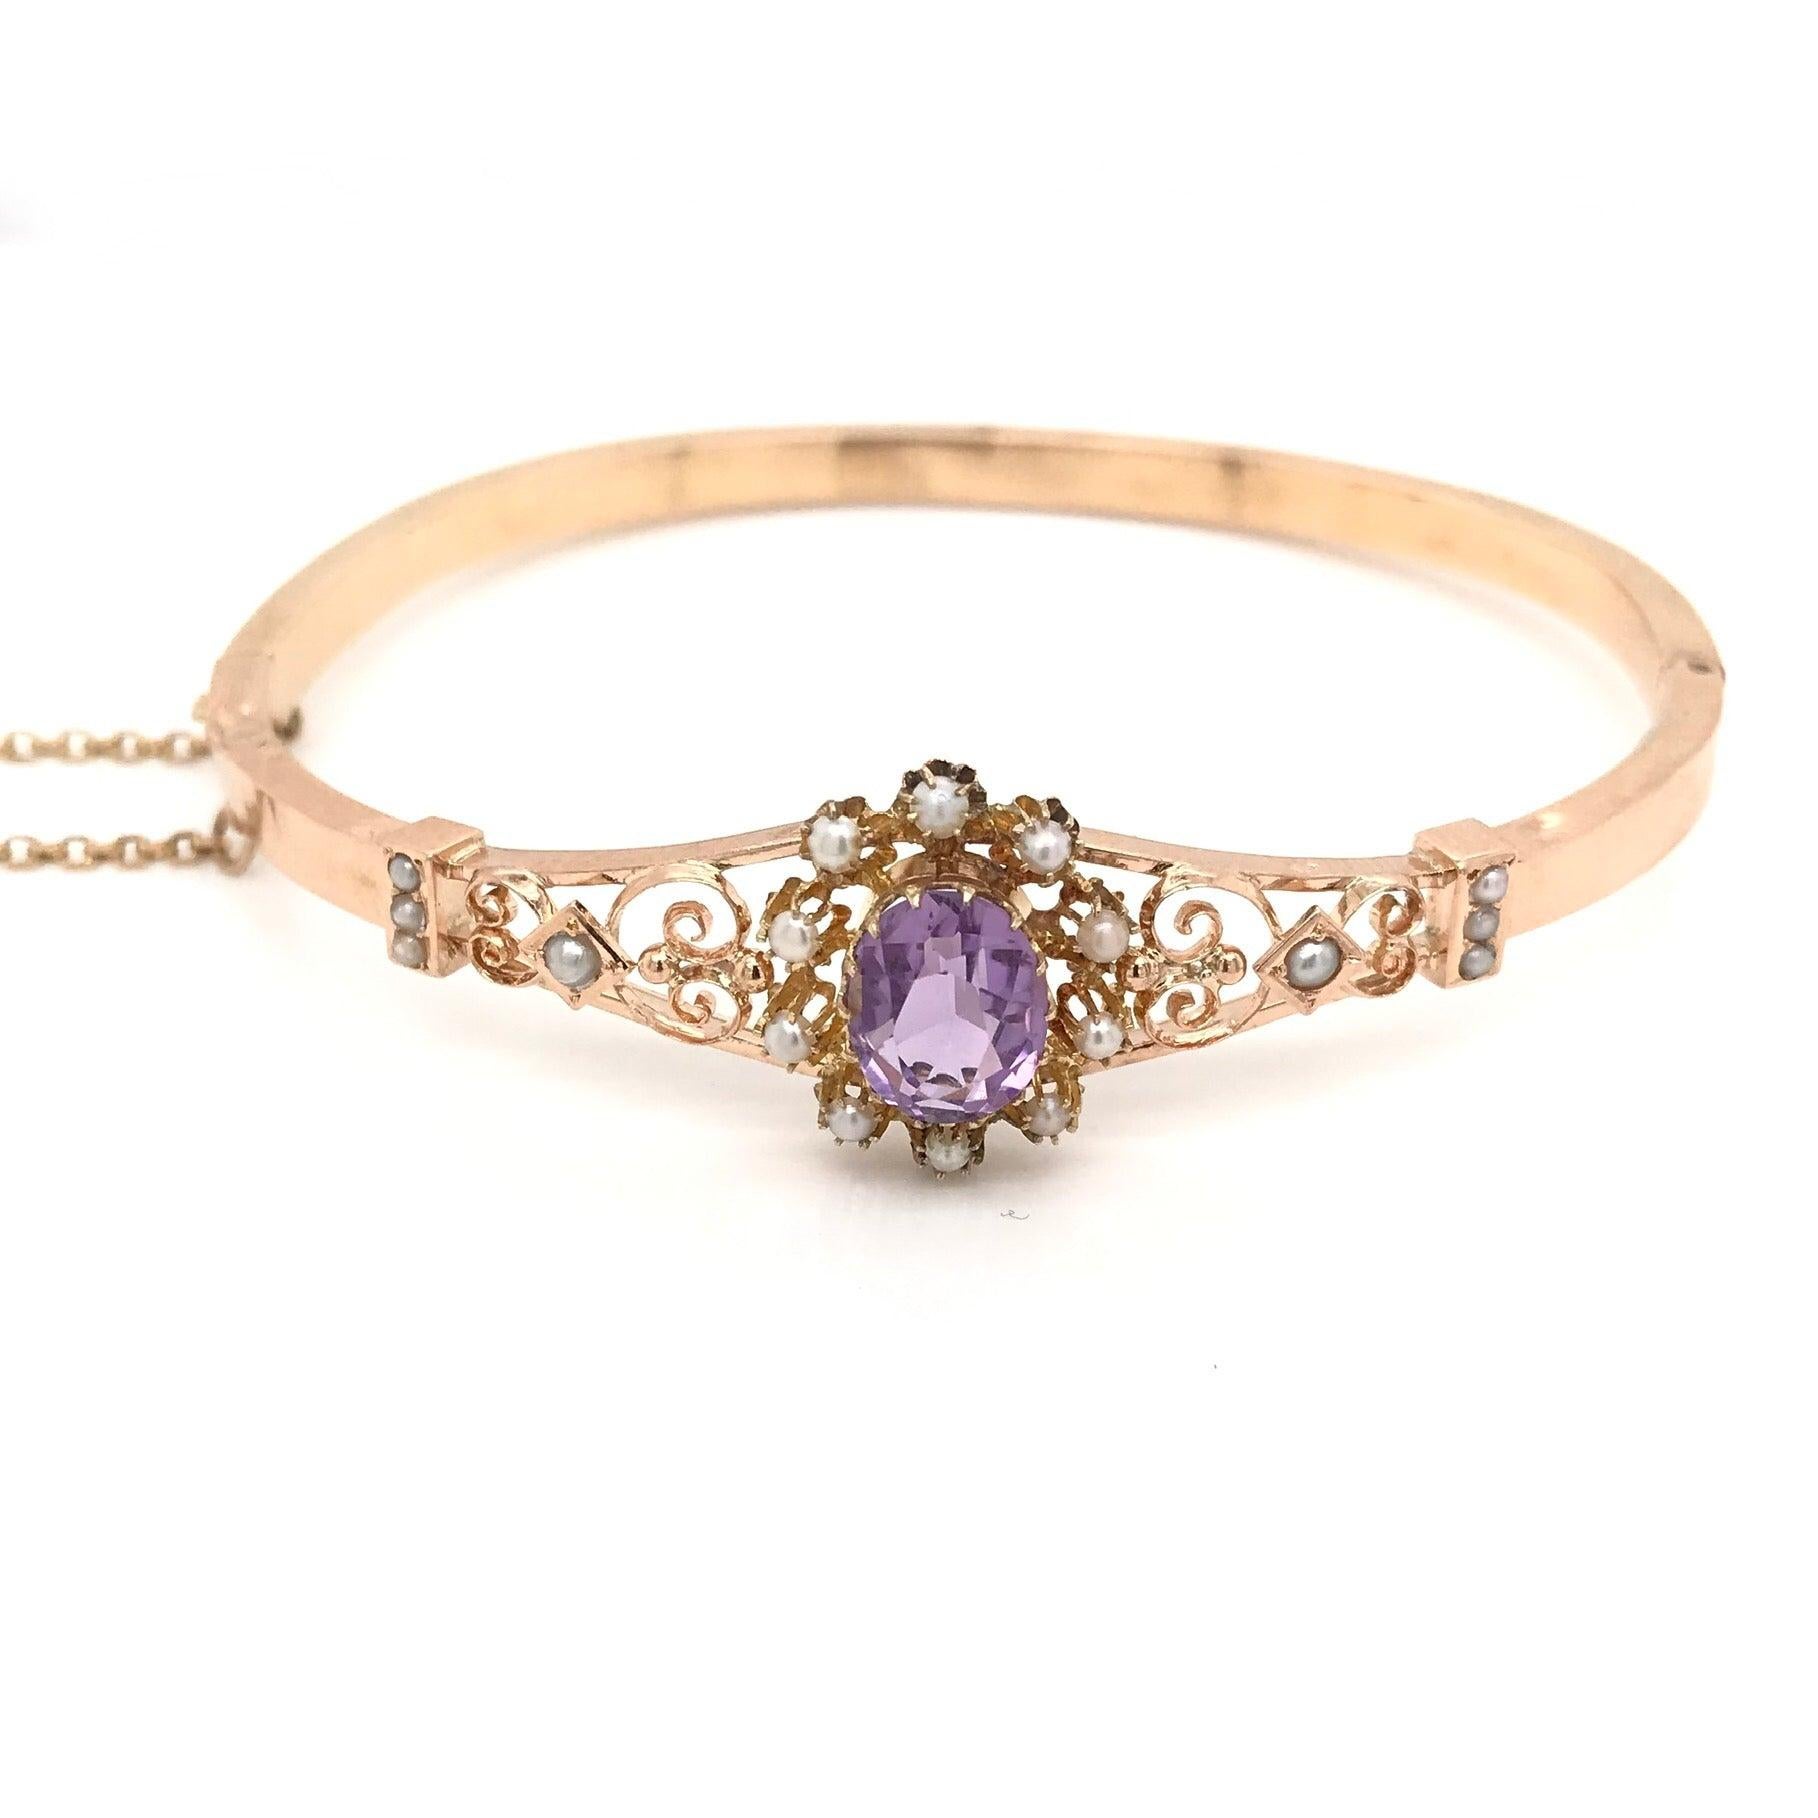 This gorgeous antique piece was crafted sometime during the Art Nouveau design period (1890-1915). The bangle is 14K gold and features a center Amethyst with a softer lilac hue and saturation. The center Amethyst is surrounded by a halo of 10